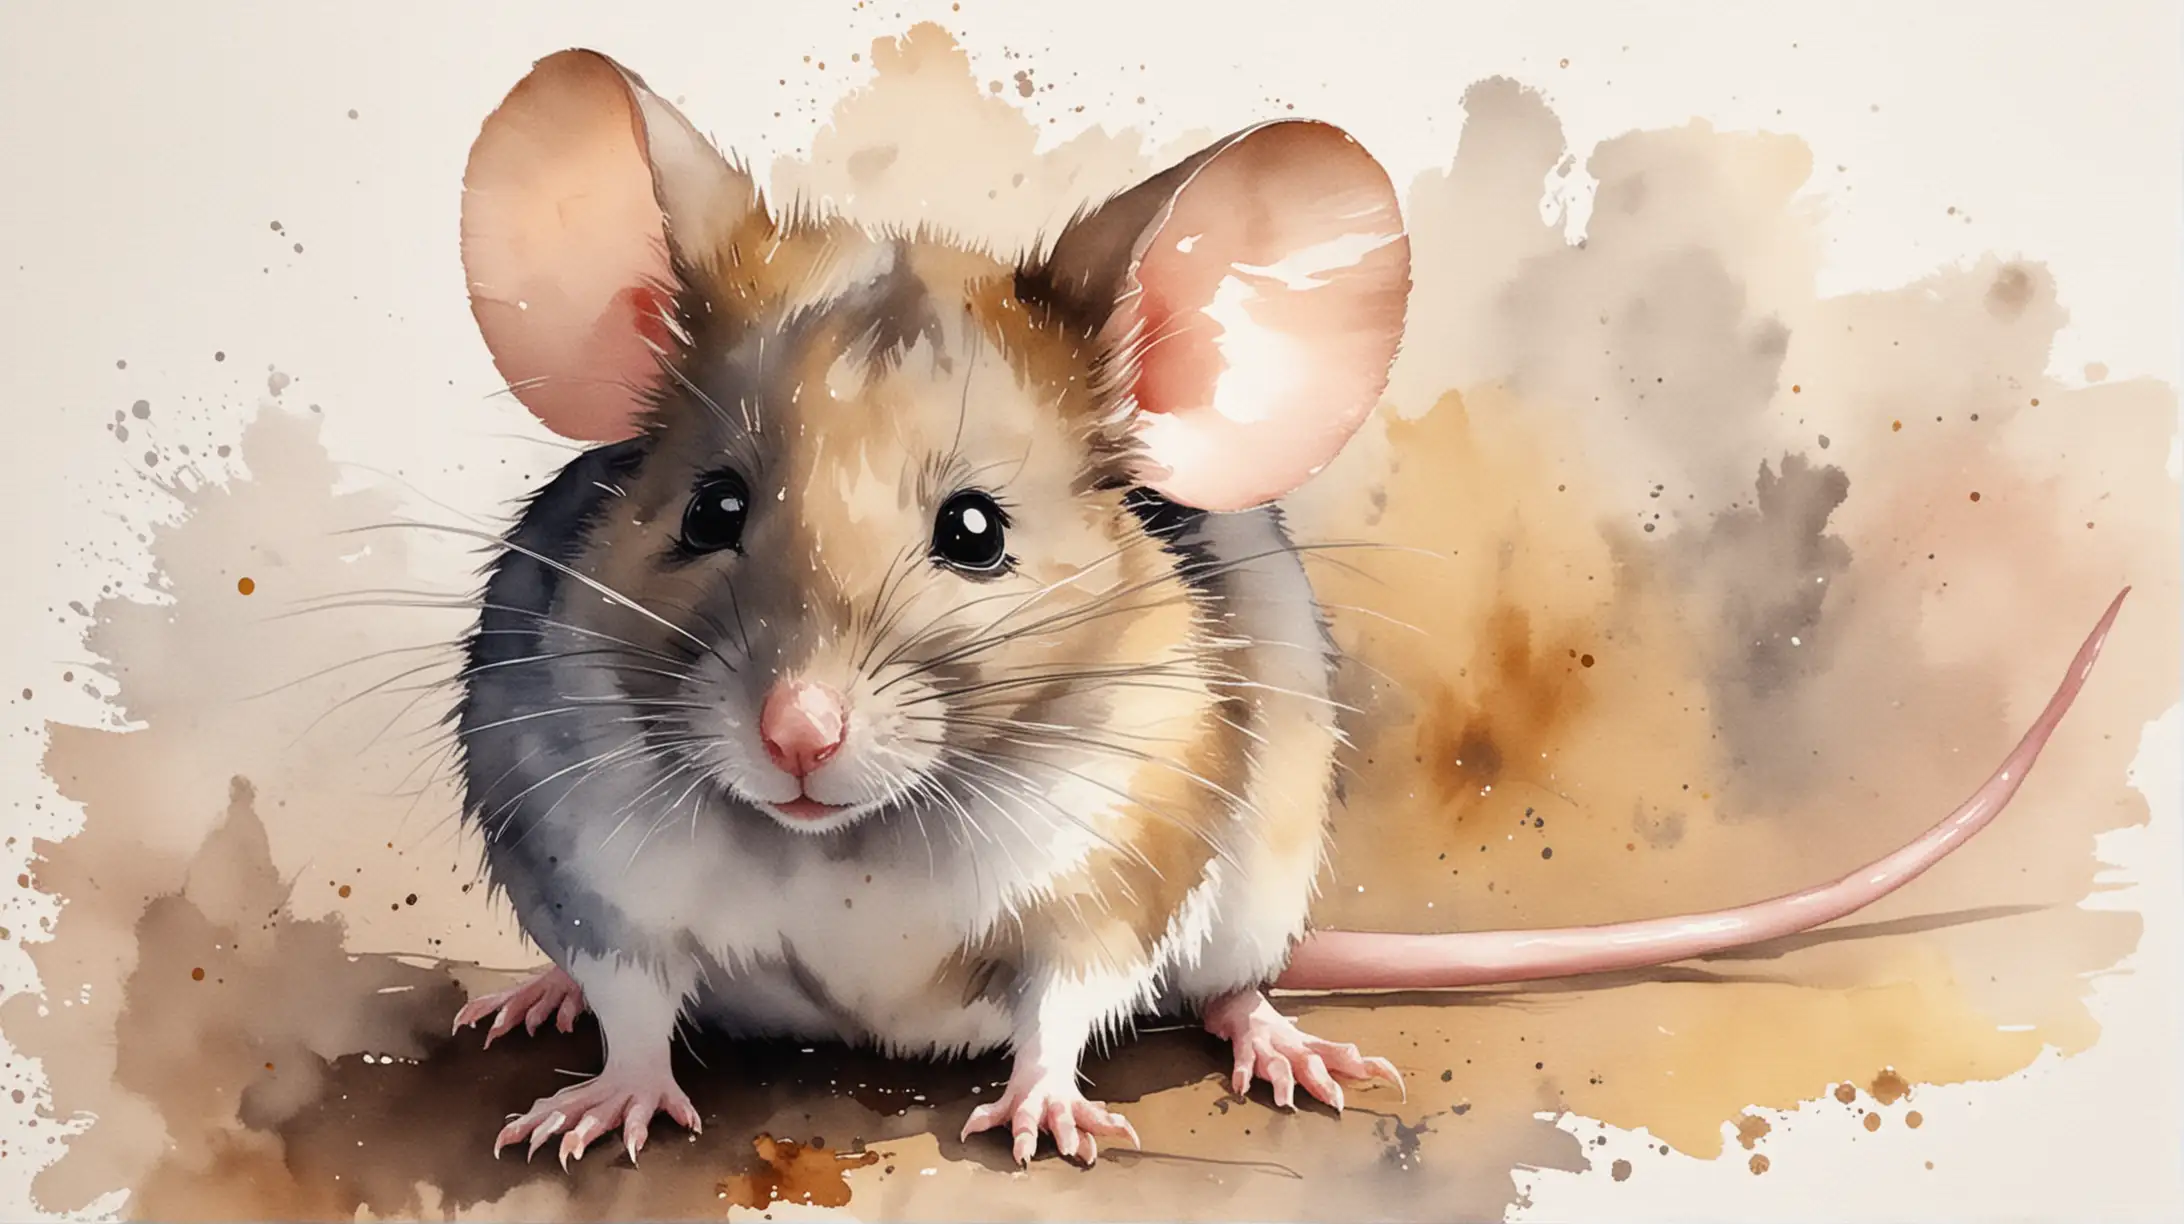 Whimsical Watercolor Painting of a Playful Mouse